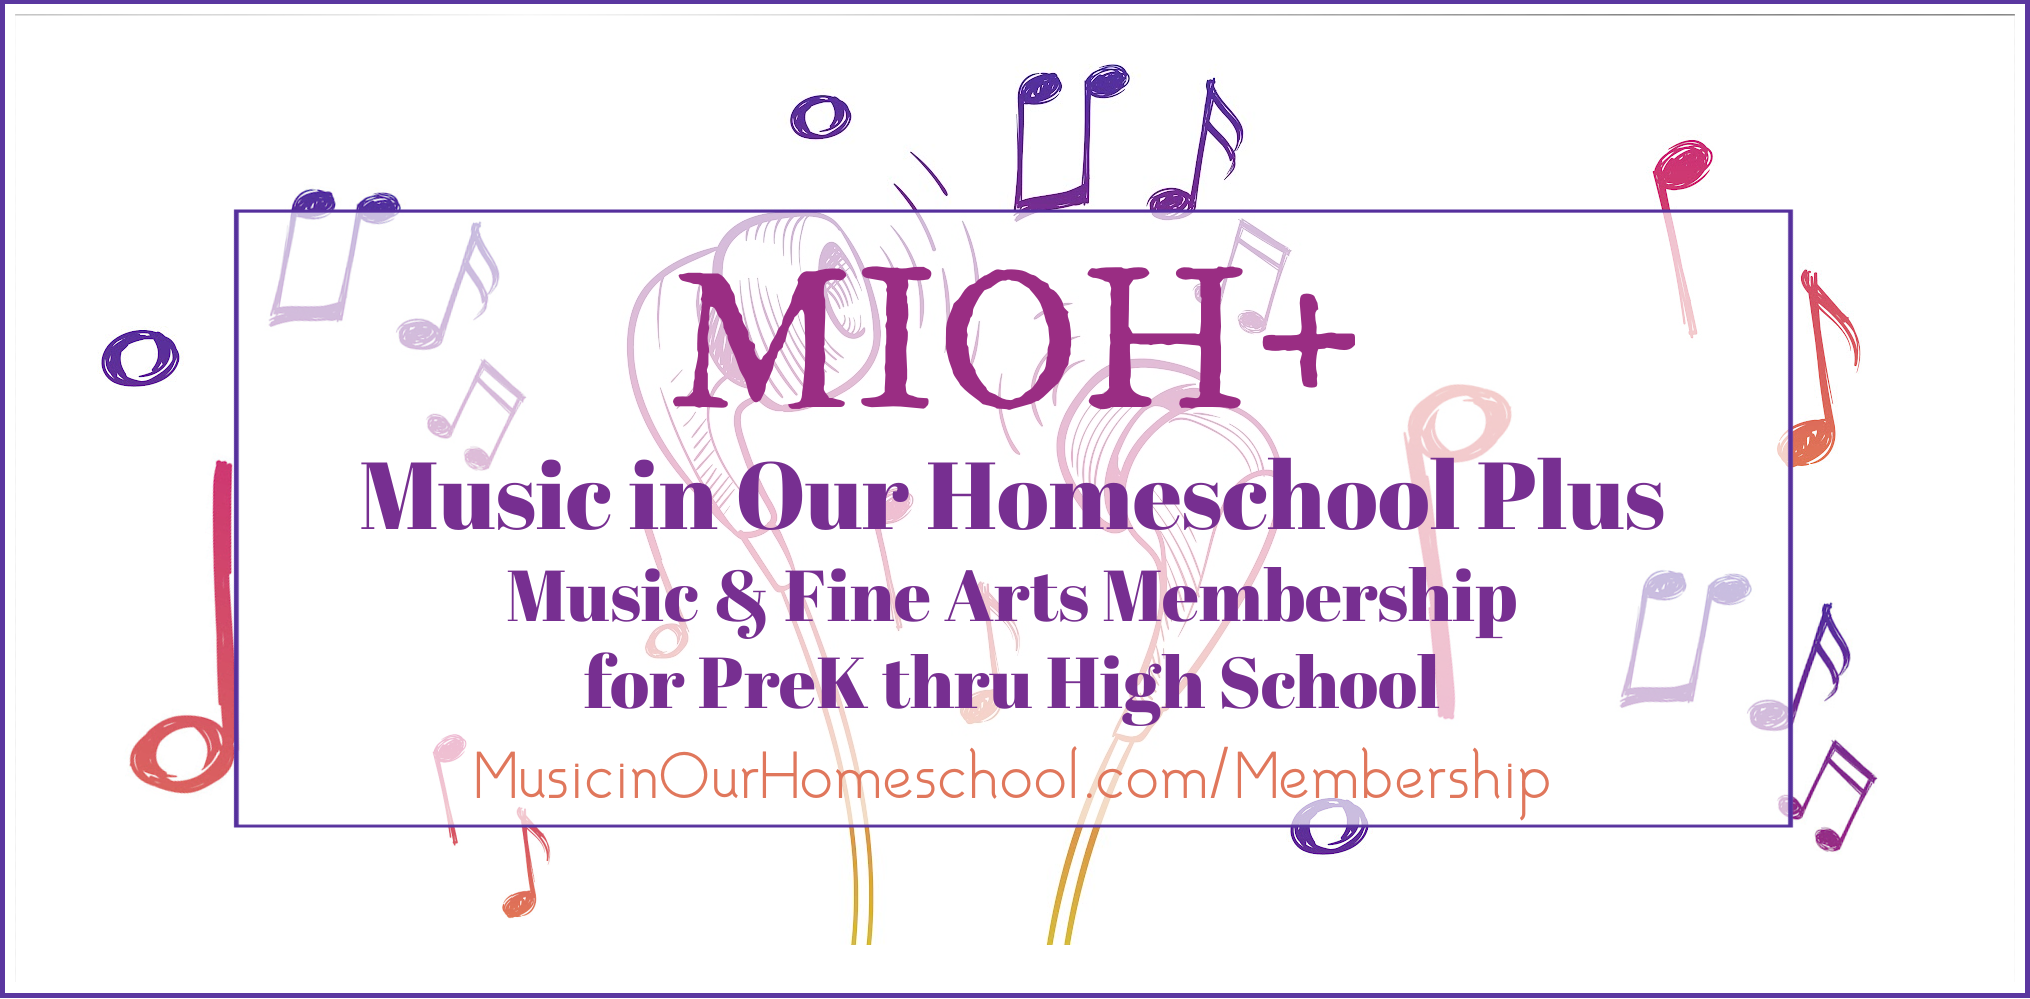 MIOH+ music and fine arts membership